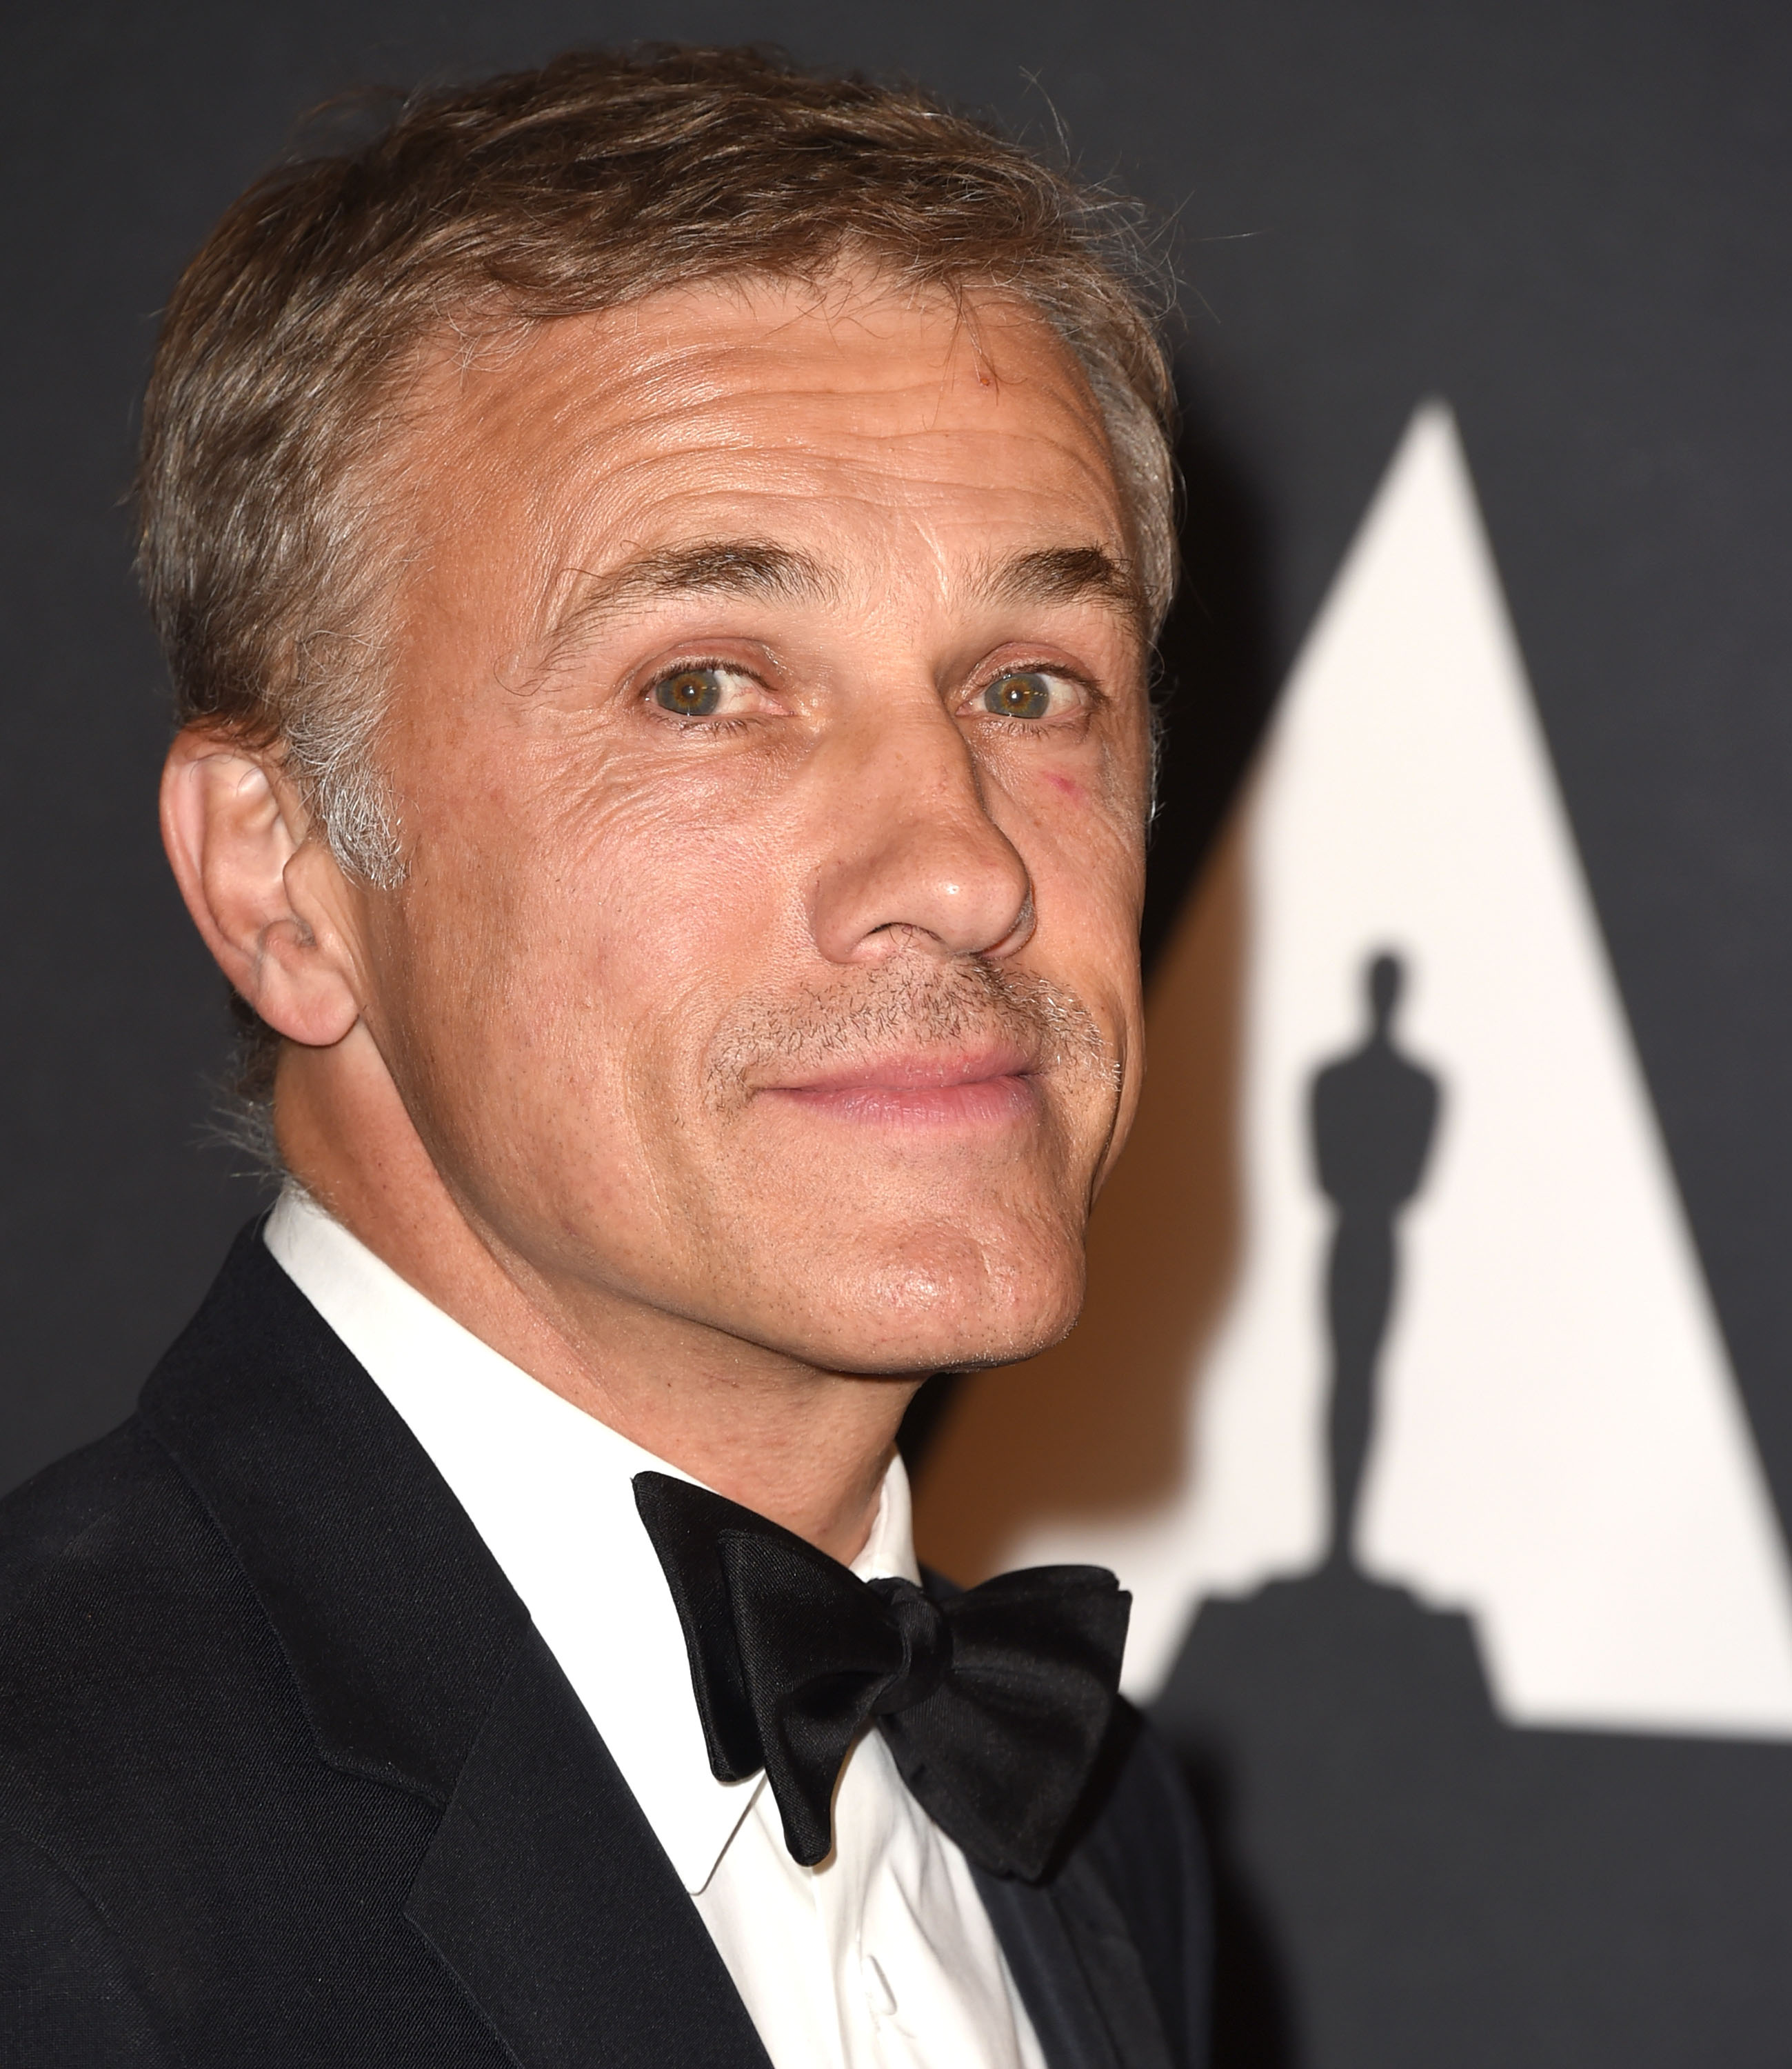 Christoph Waltz arrives at the Motion Picture Academy's 6th Annual Governors Awards at Dolby Theatre on November 8, 2014 in Hollywood, California. (Steve Granitz&amp;mdash;WireImage/Getty Images)